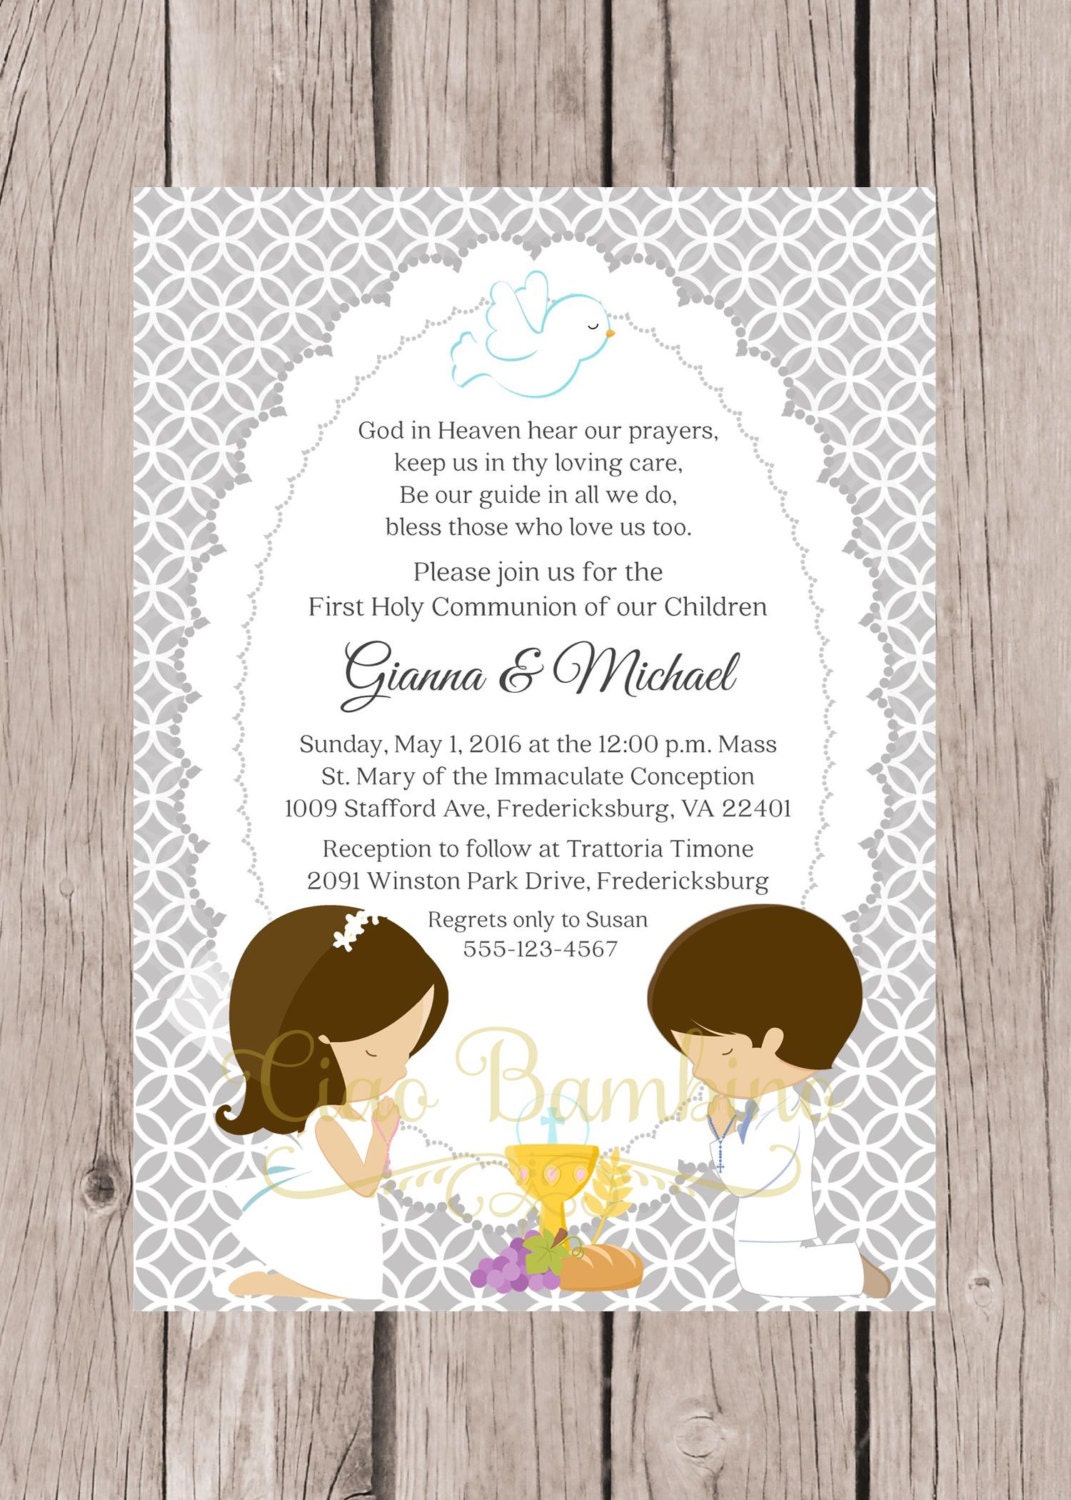 Confirmation Invitations For Twins 10